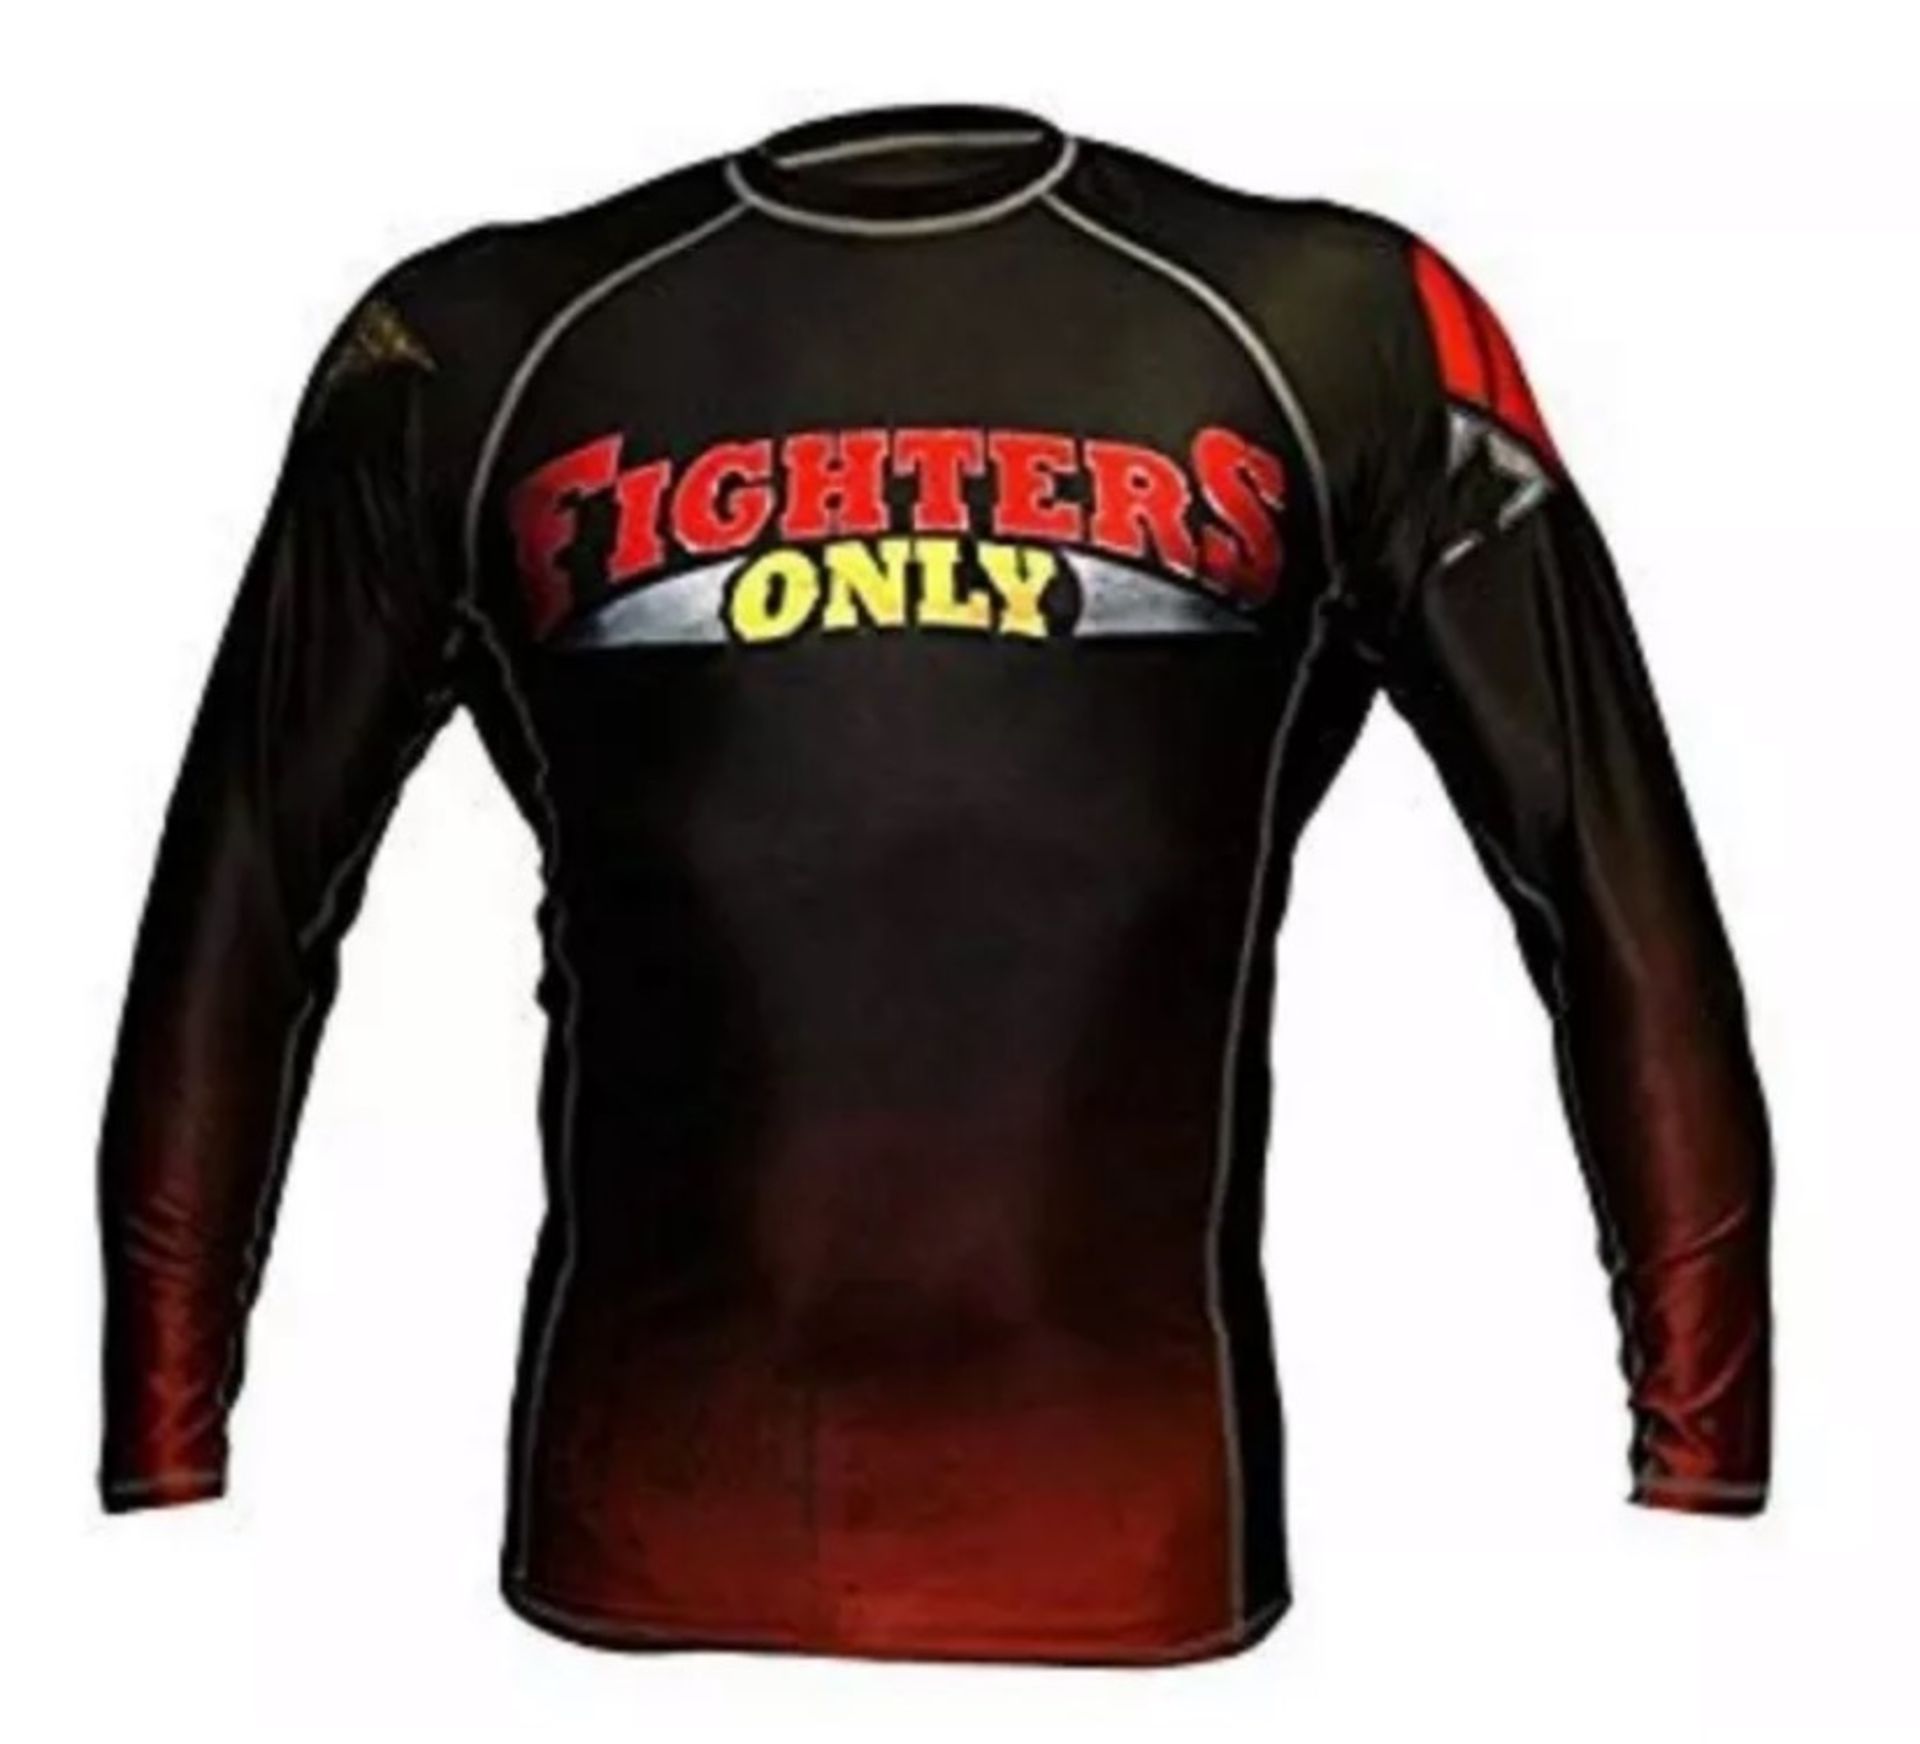 16 "Fighters Only" Rash Guard Training fighting Tops - MMA UFC